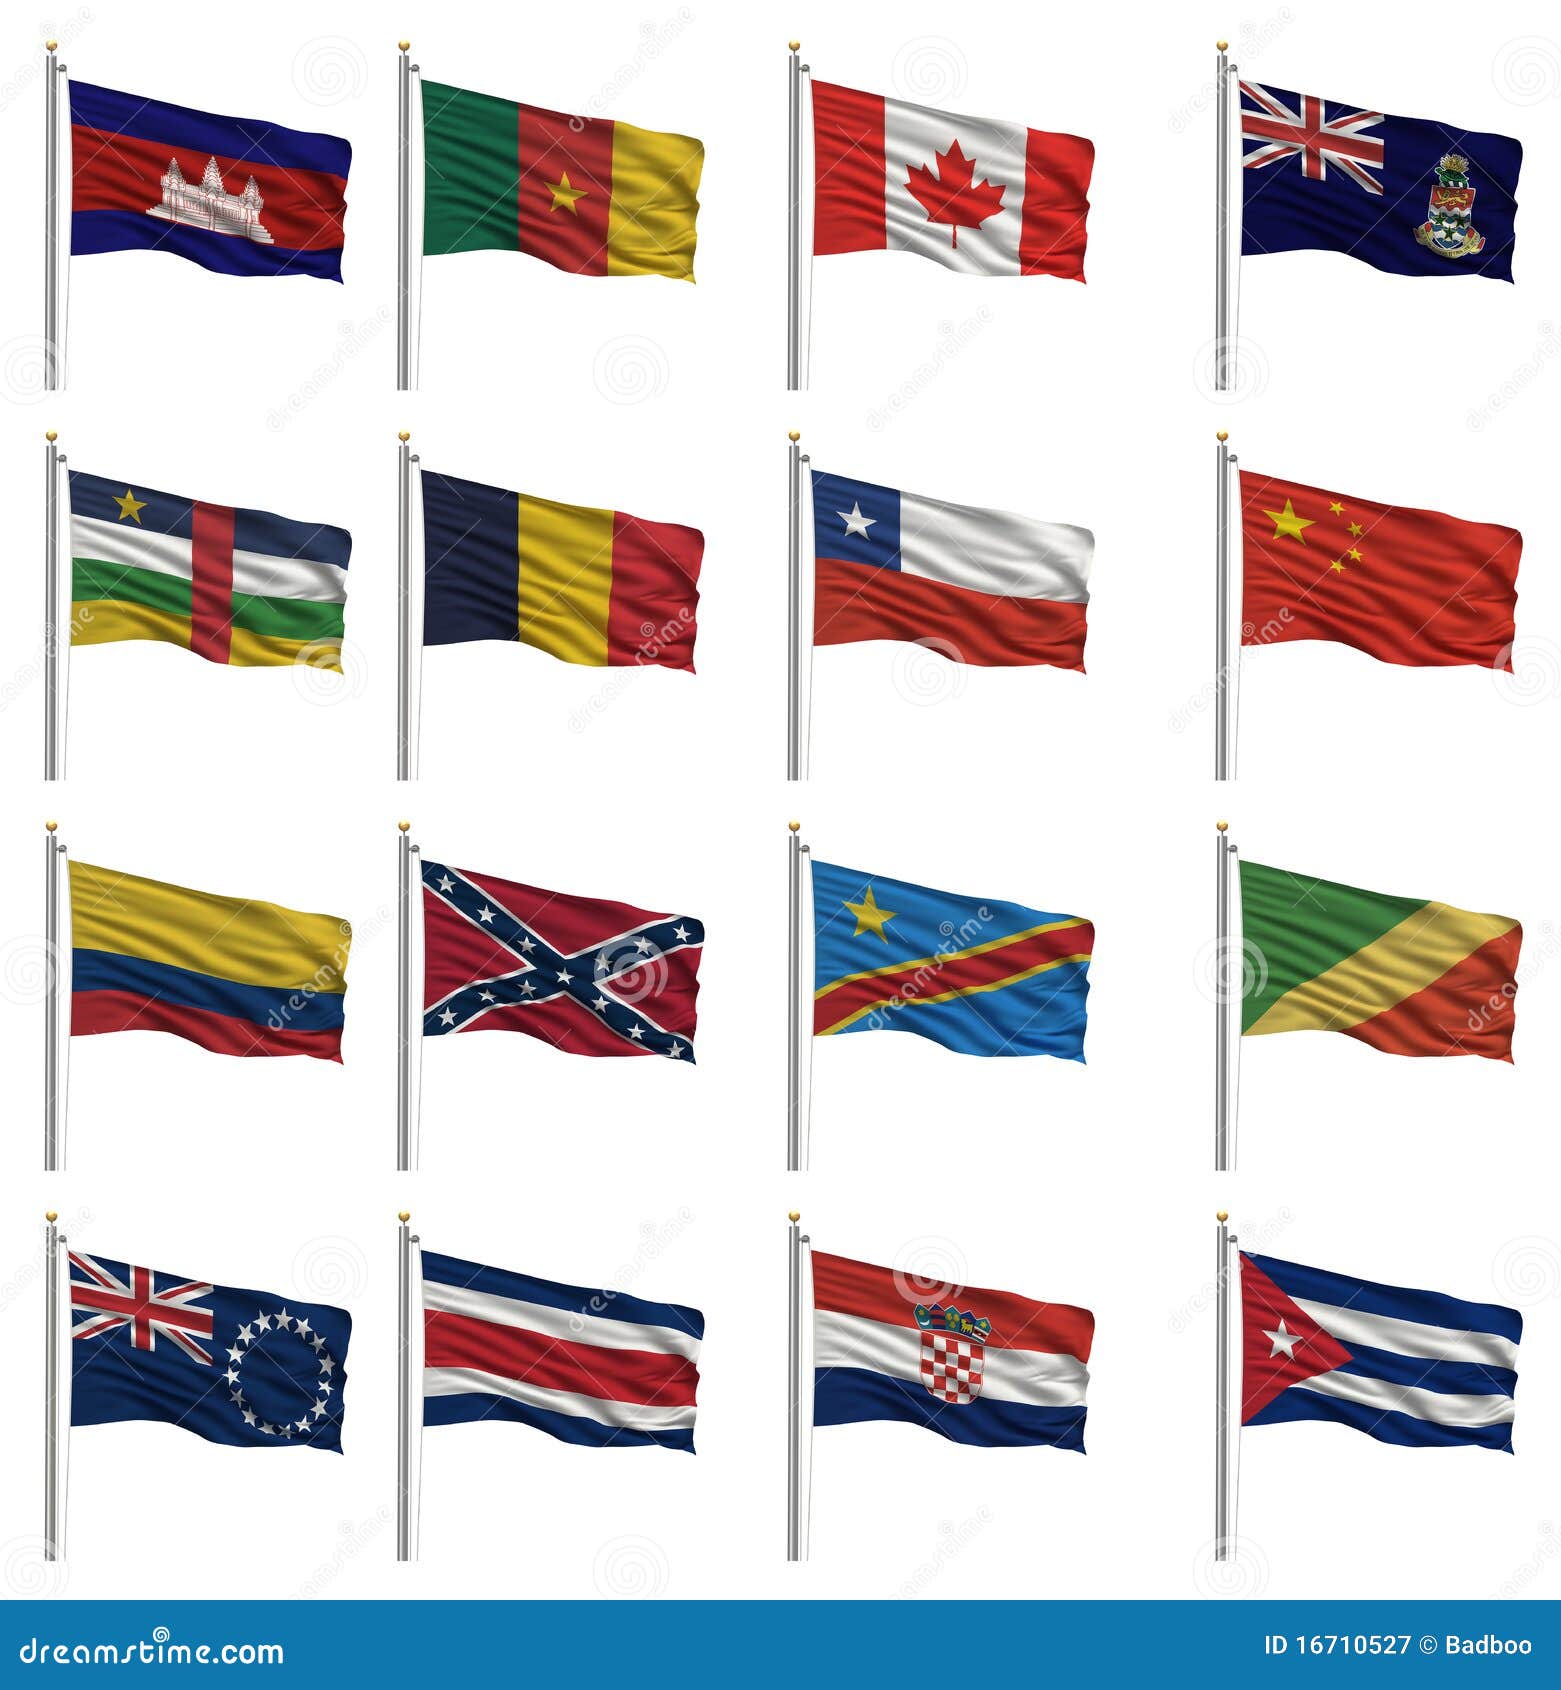 National Flags With The Letter C Royalty Free Stock Photography - Image